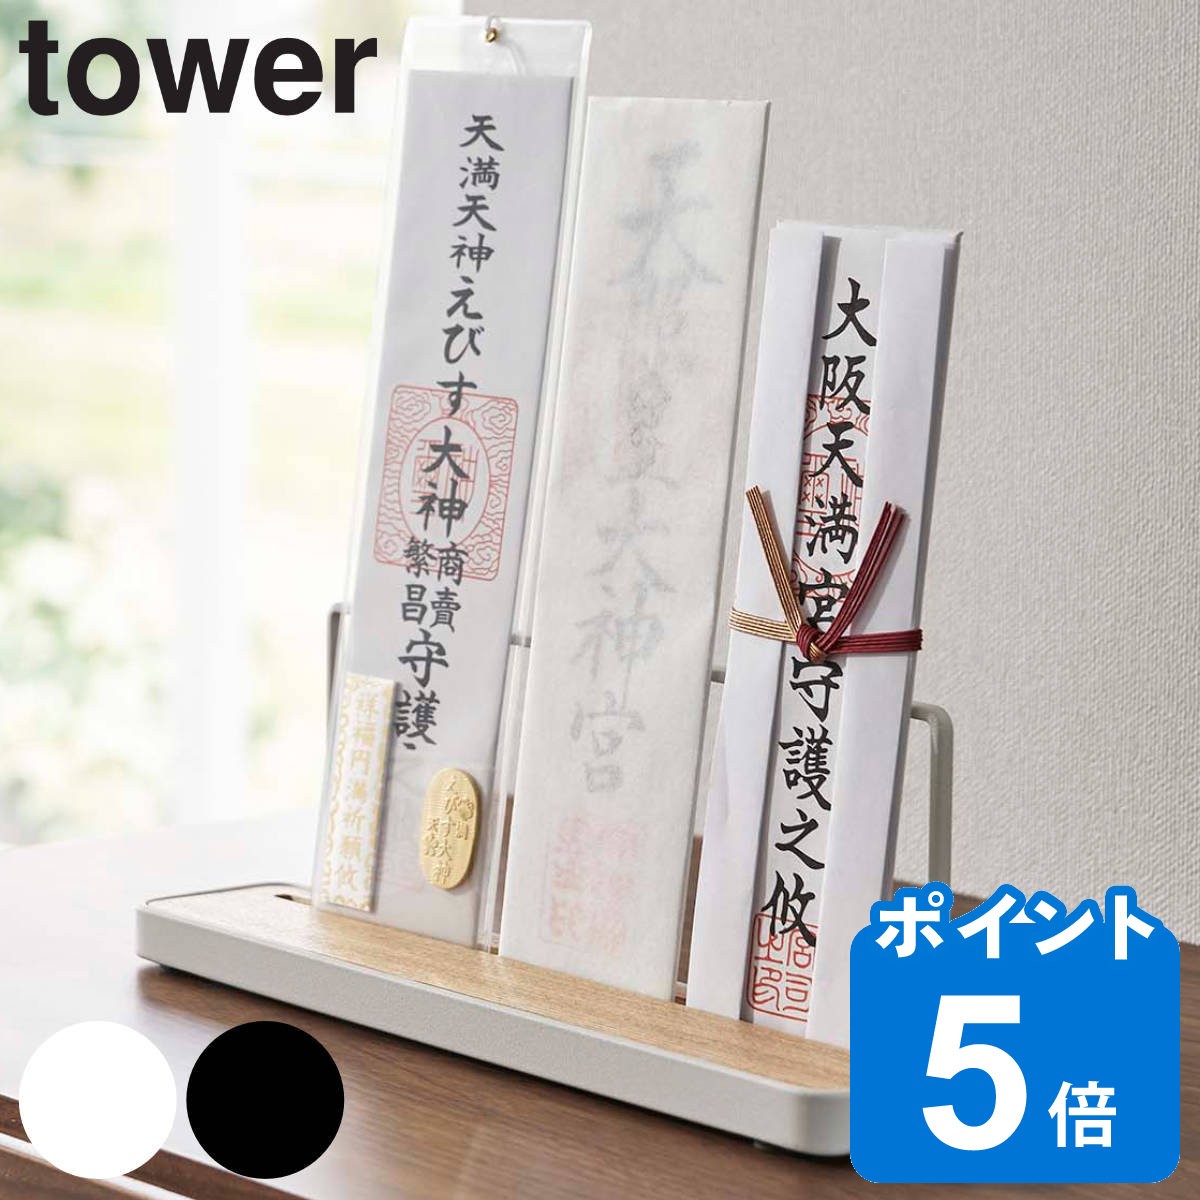 tower _DX^h ^[